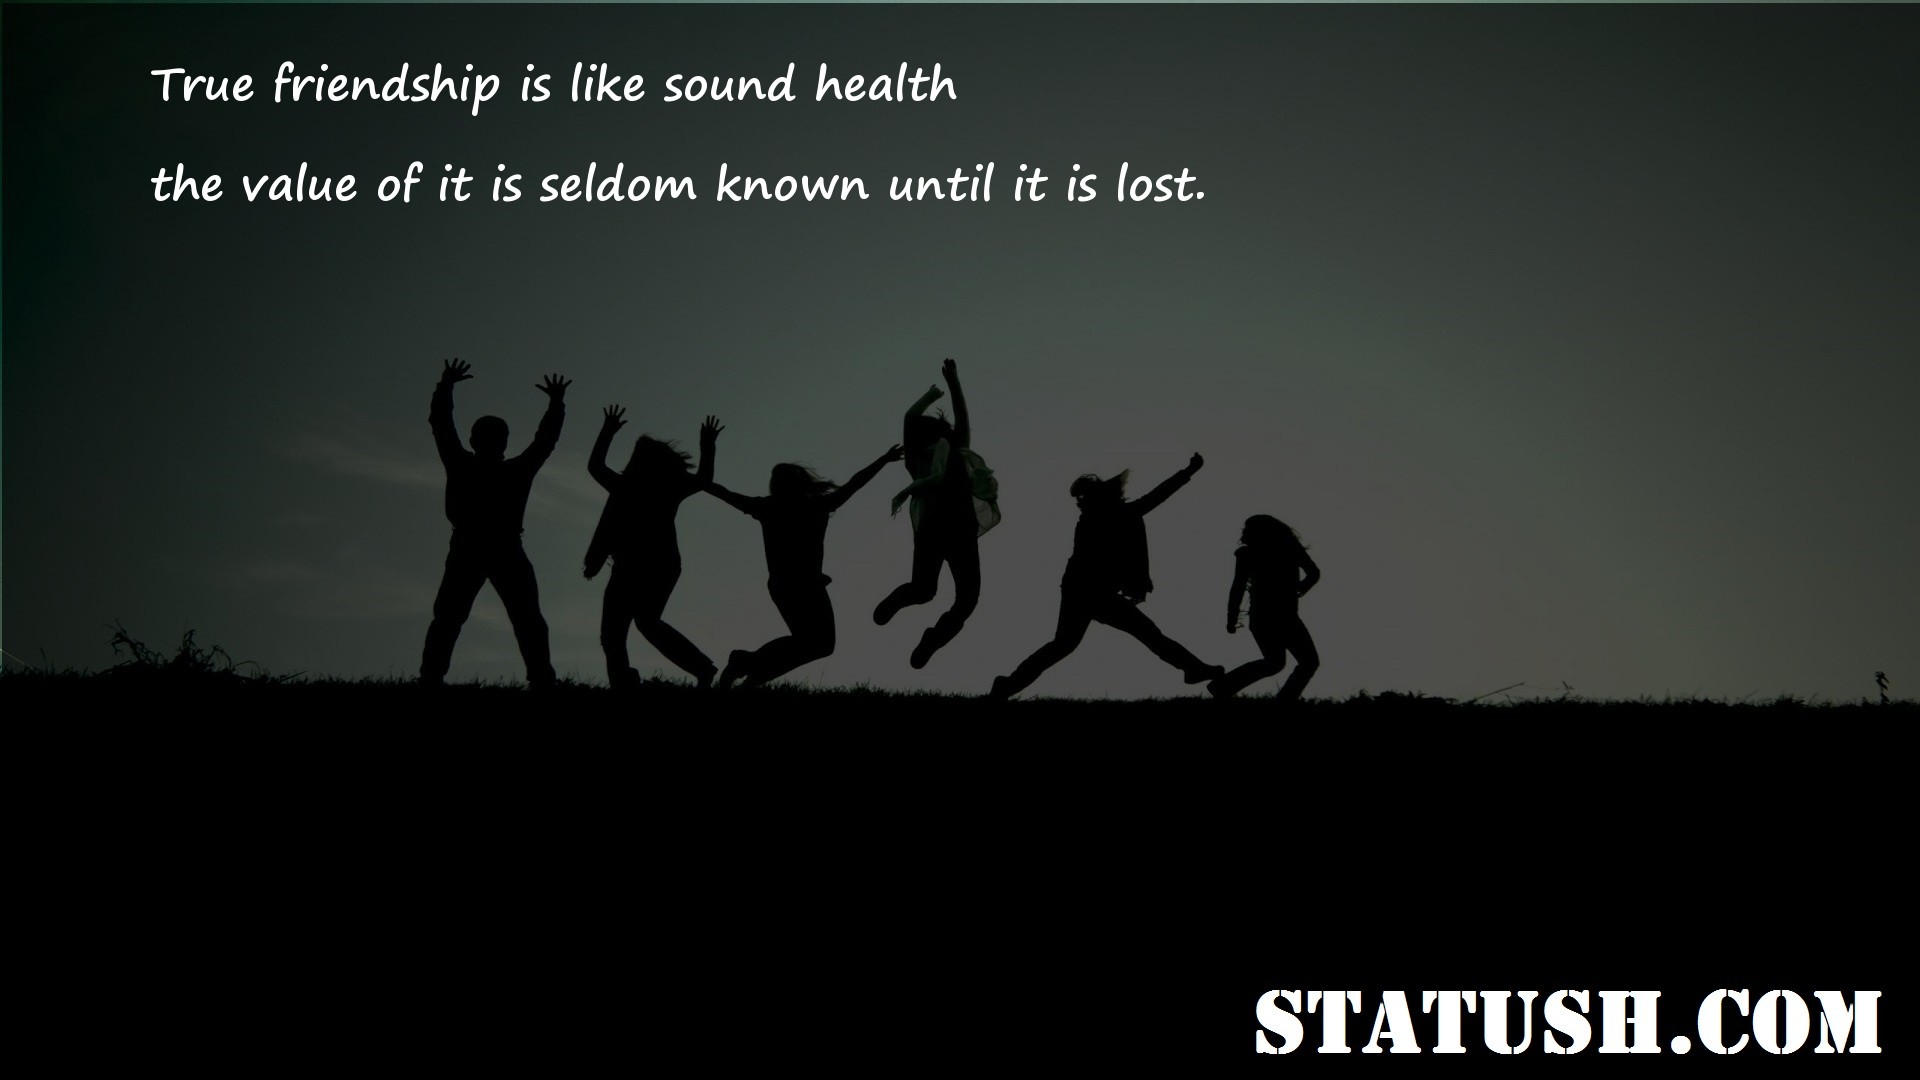 True friendship is like sound health - Friendship Quotes at statush.com